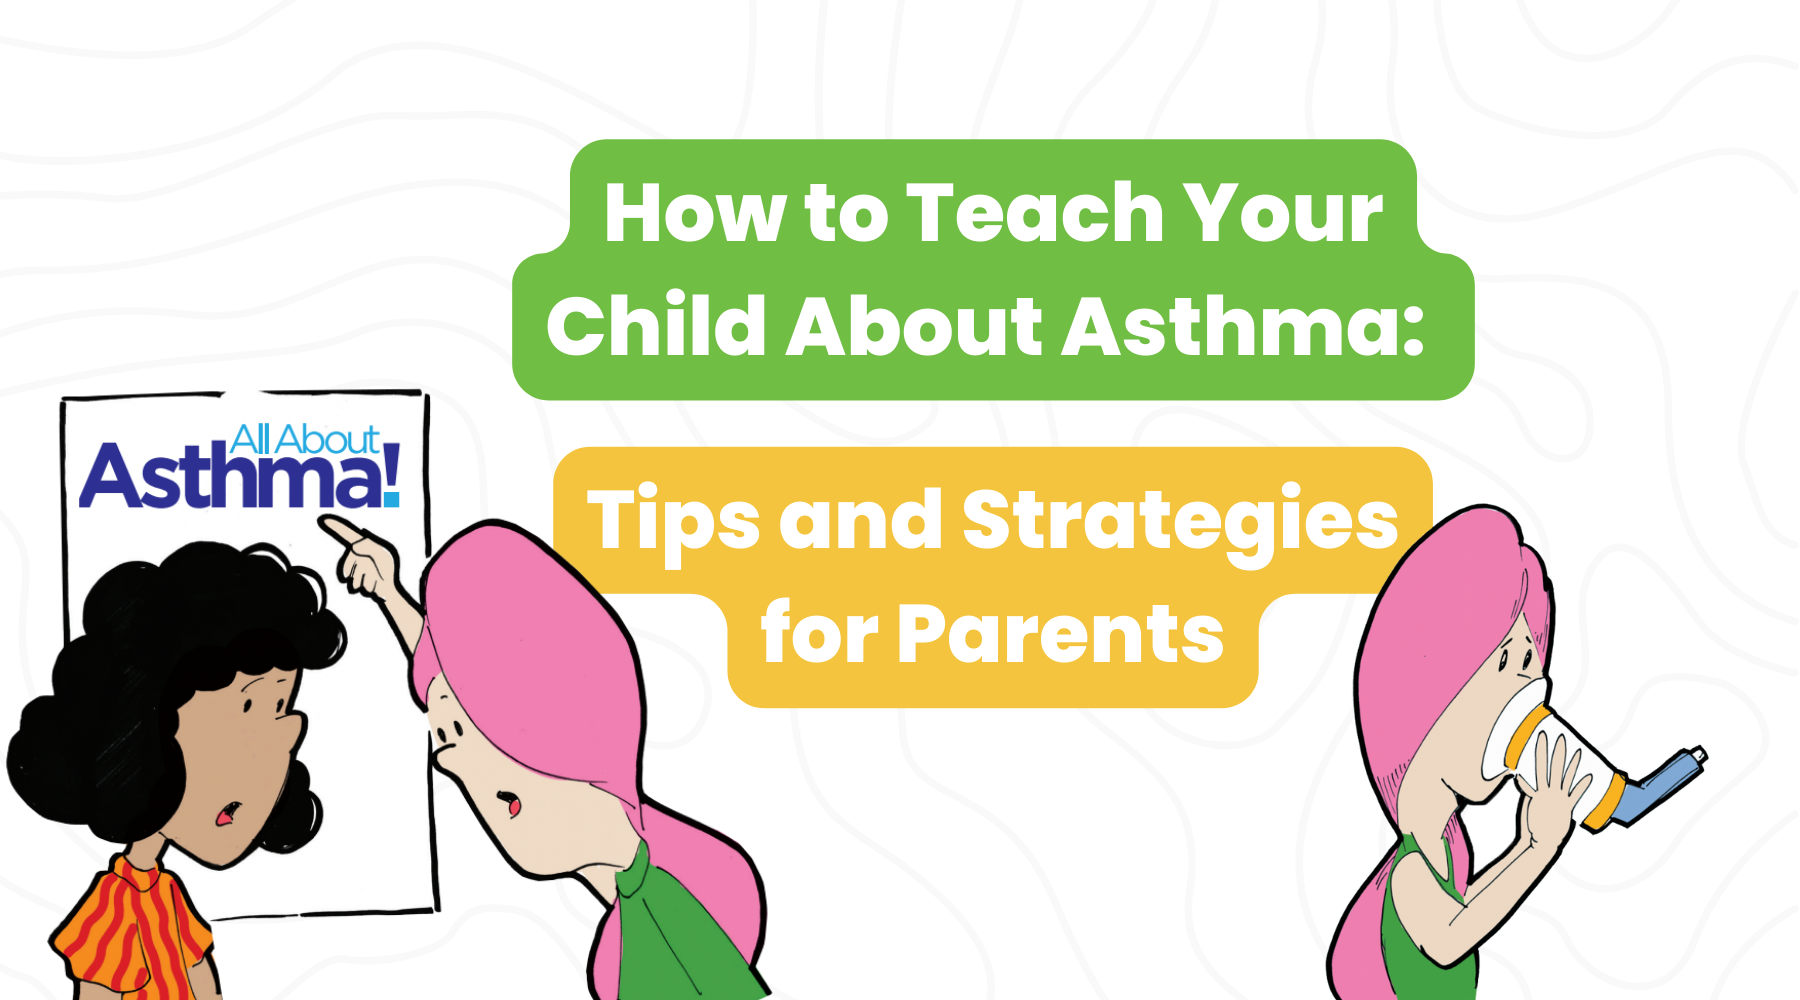 How to Teach Your Child about Asthma: Tips and Strategies for Parents